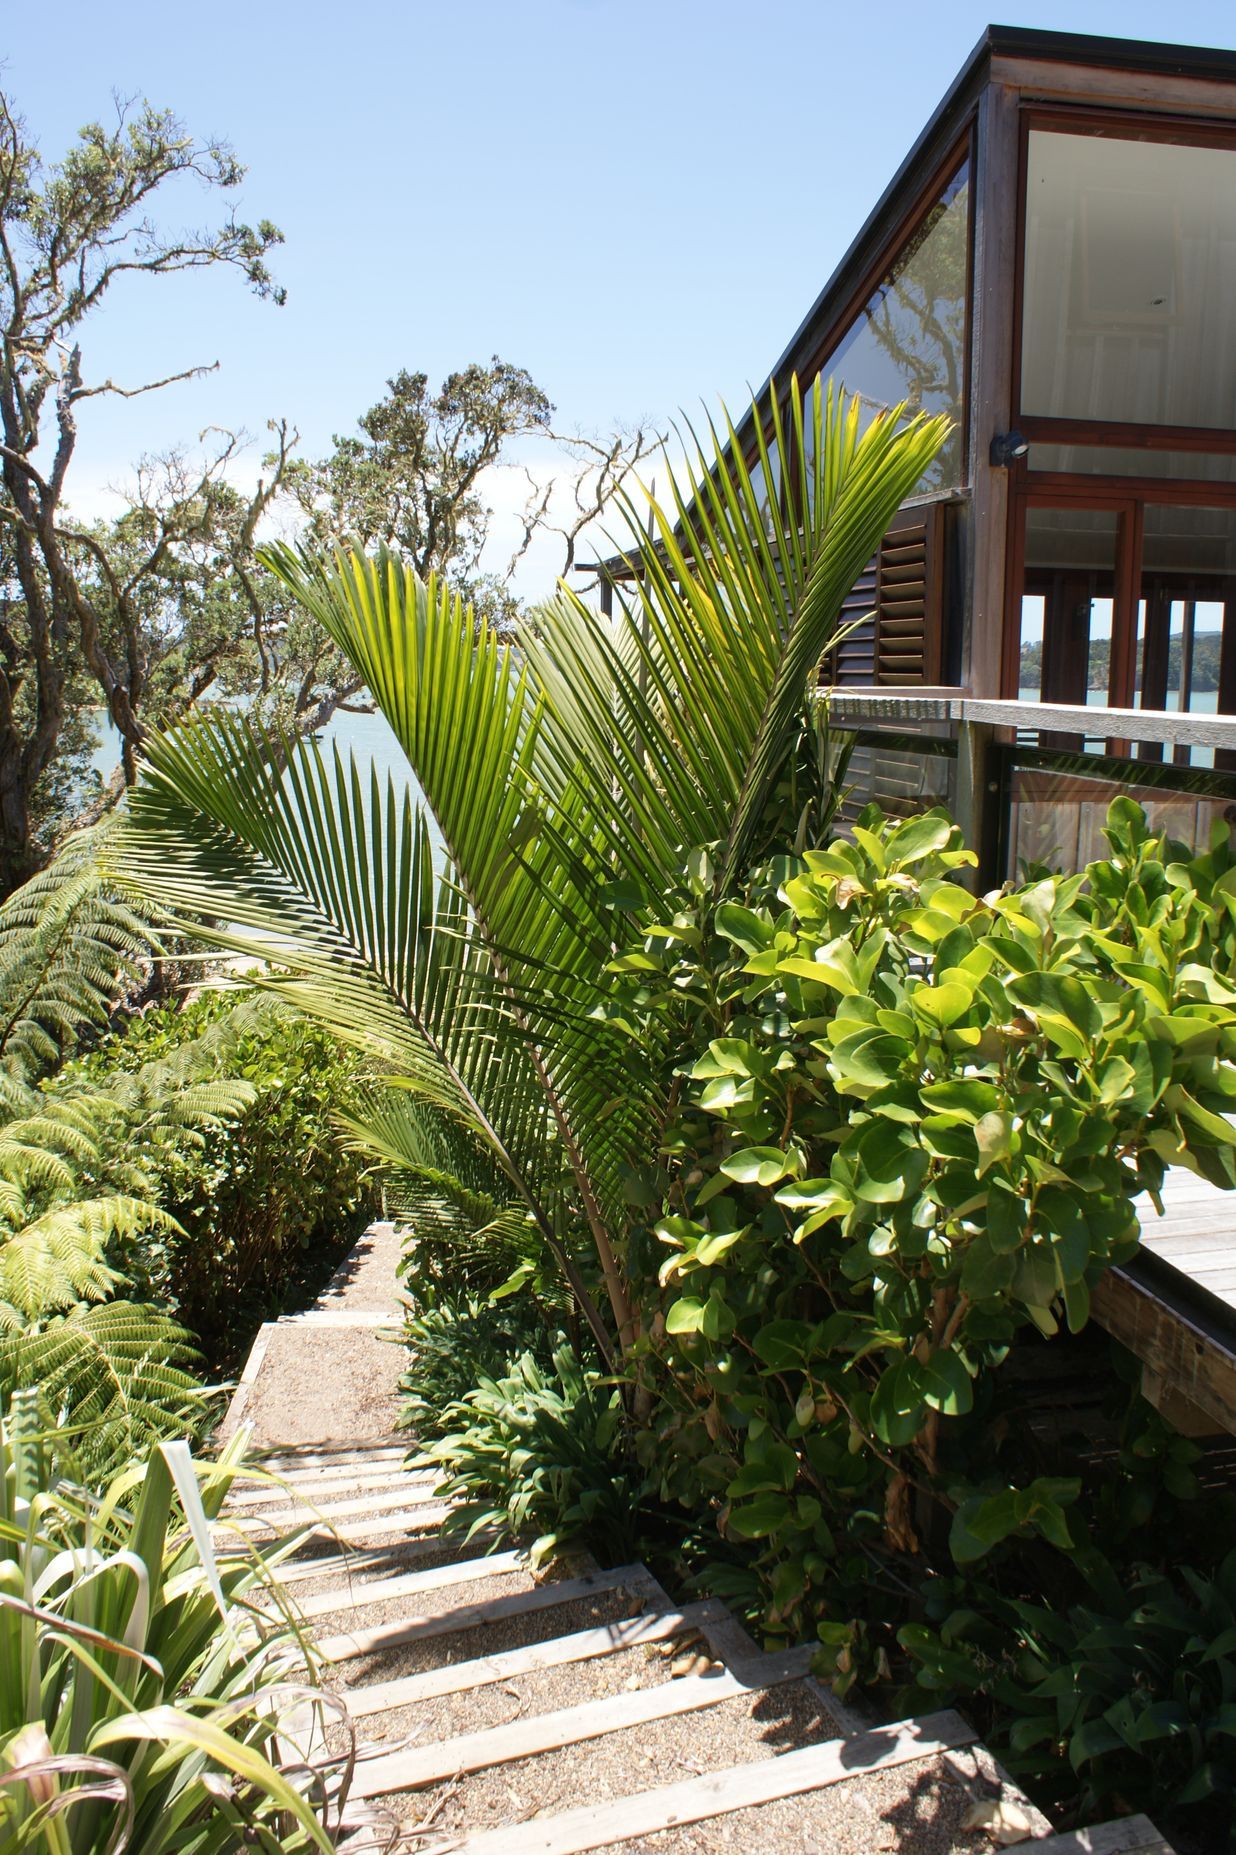 Inspired by local remnant native forest, nikau, tree ferns, and Northland native plants connect the architecture to the surrounding landscape in this Paihia garden.